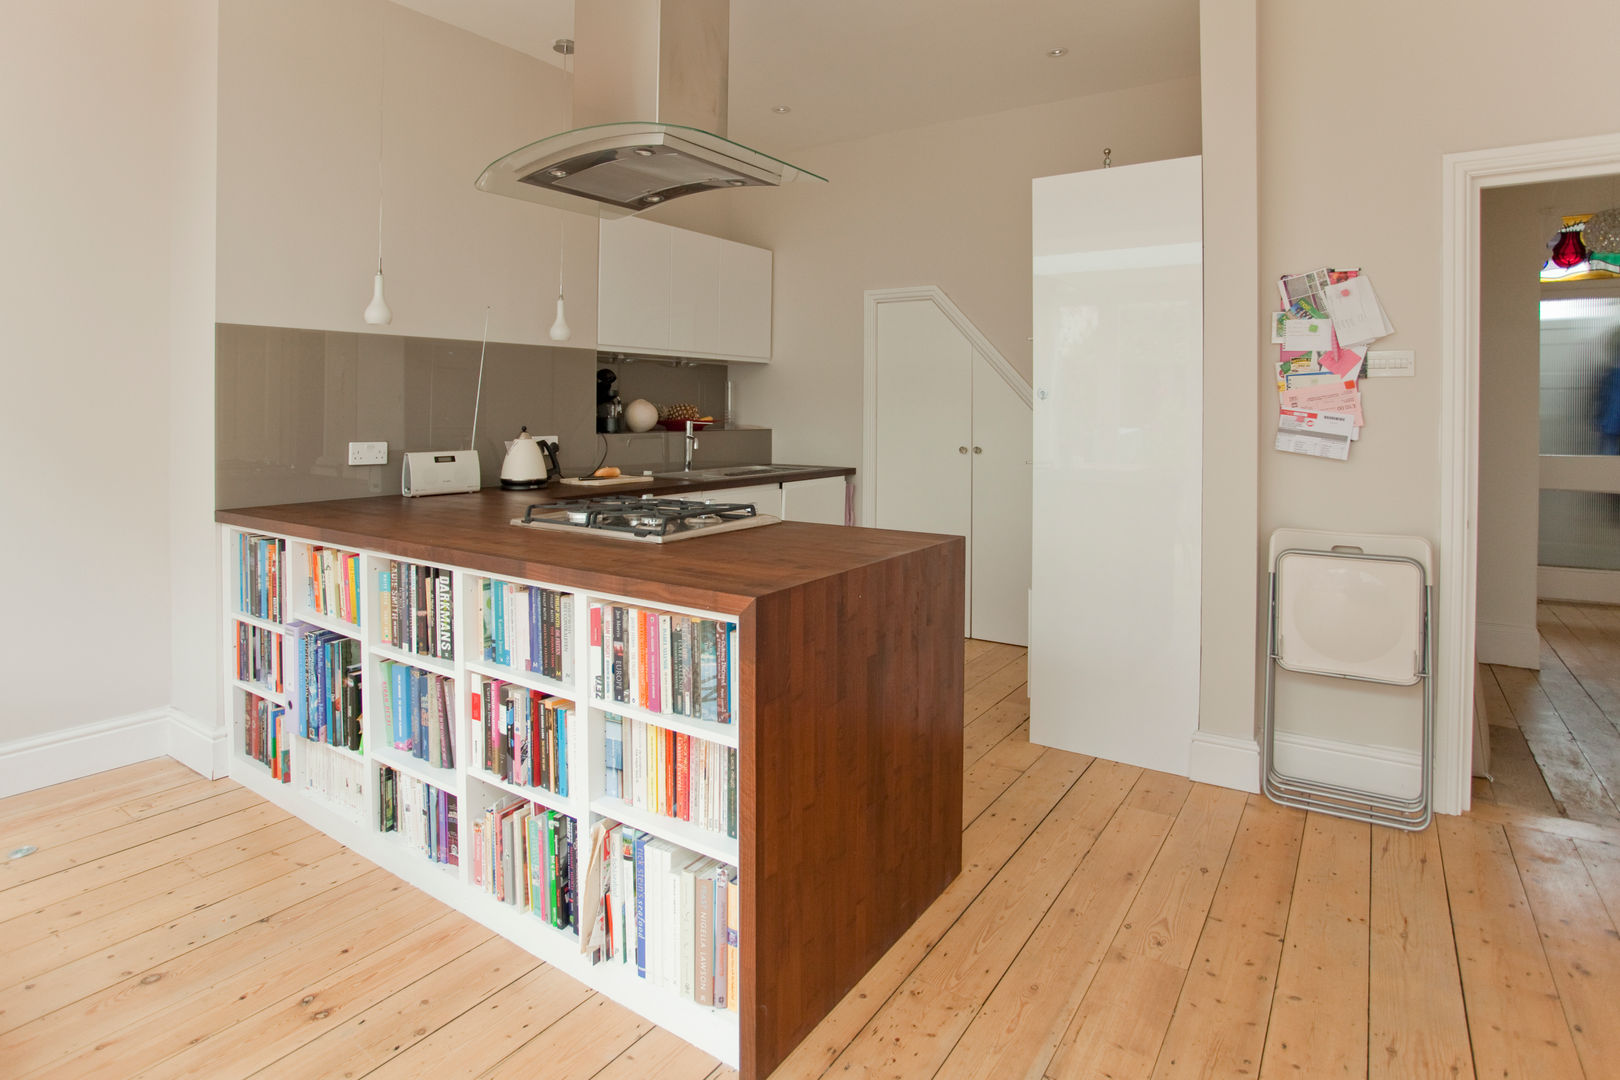 Rear extension and remodelling in Central Bristol Dittrich Hudson Vasetti Architects Кухня